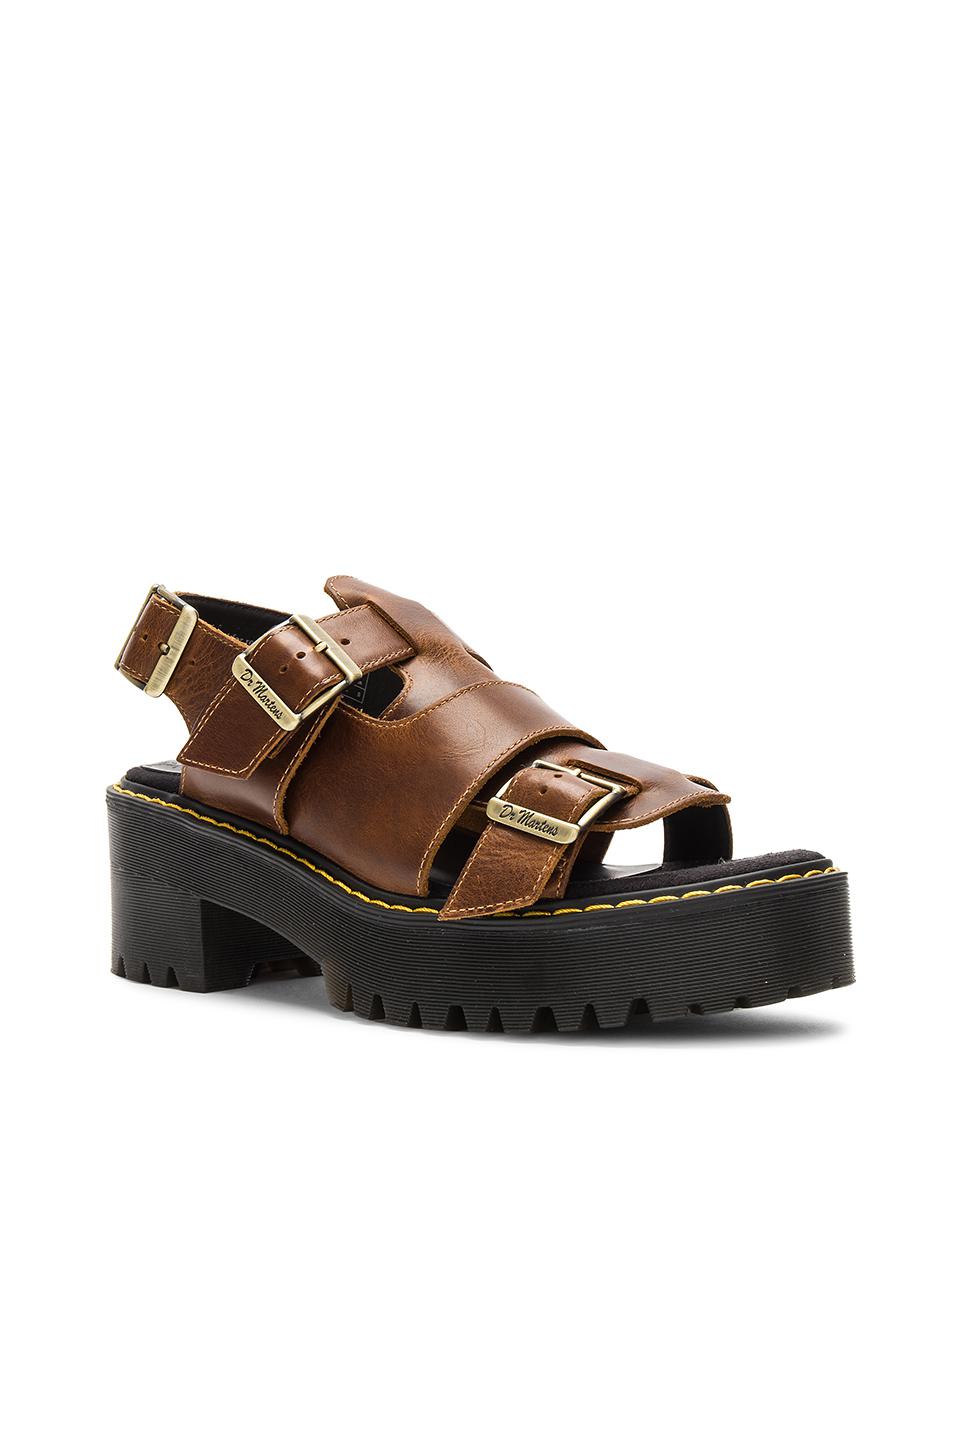 Dr. Martens Leather Ariel Sandal in Butterscotch (Brown) | Lyst